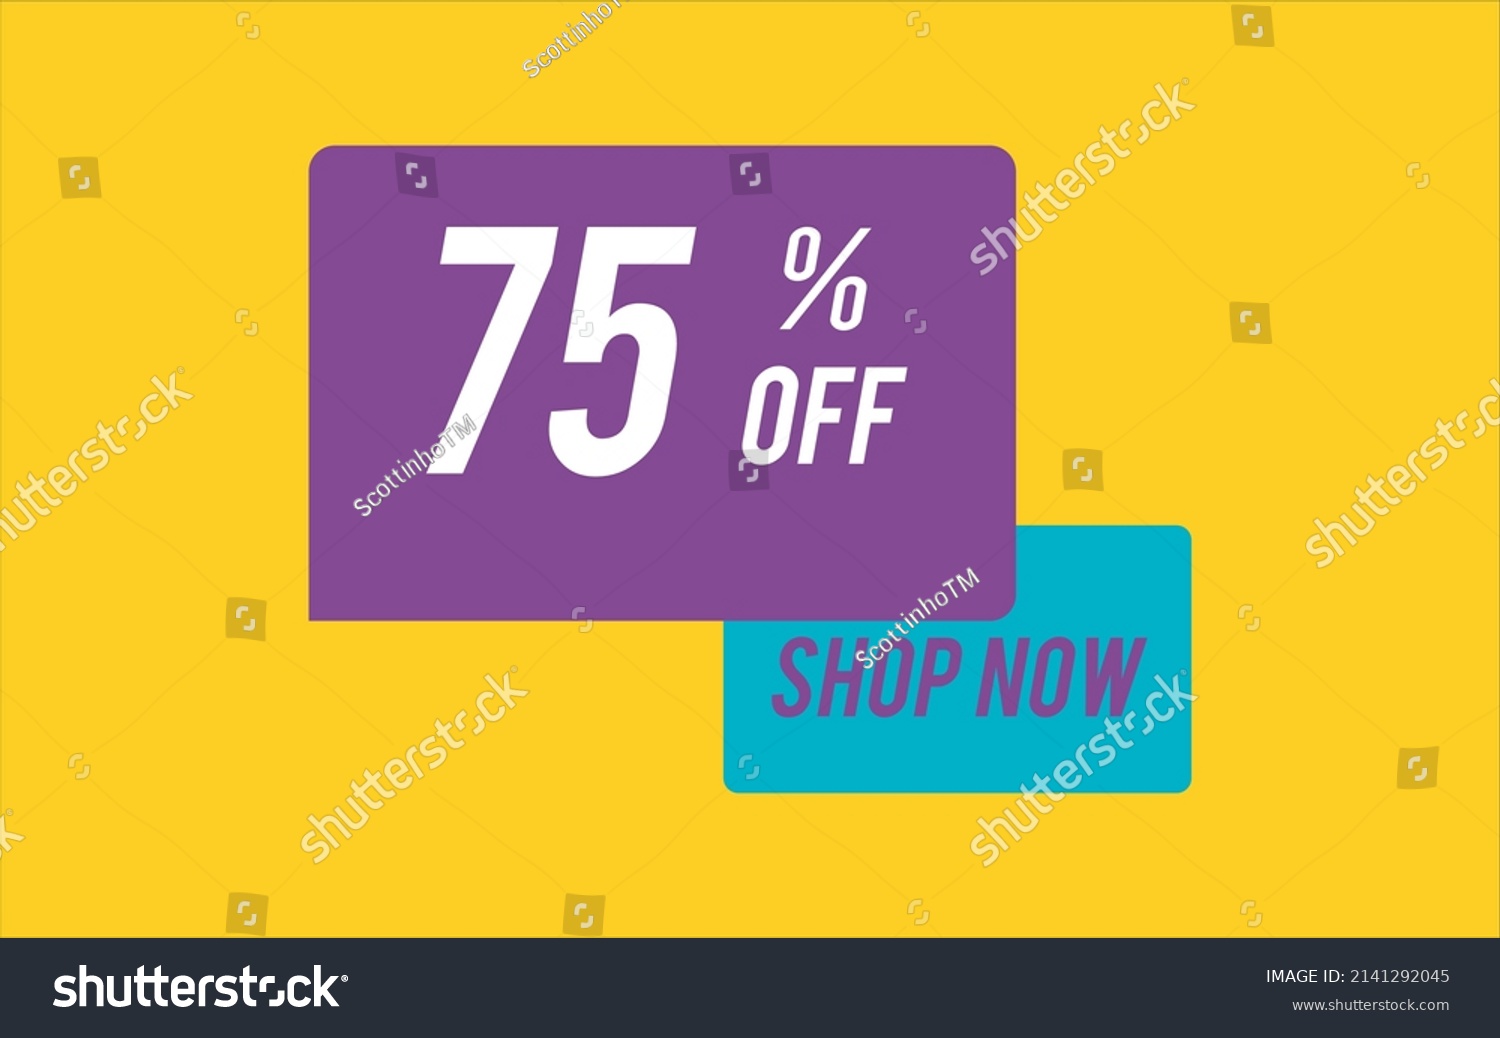 SVG of 75 percent. Discount for big sale shop now. yellow and purple background svg